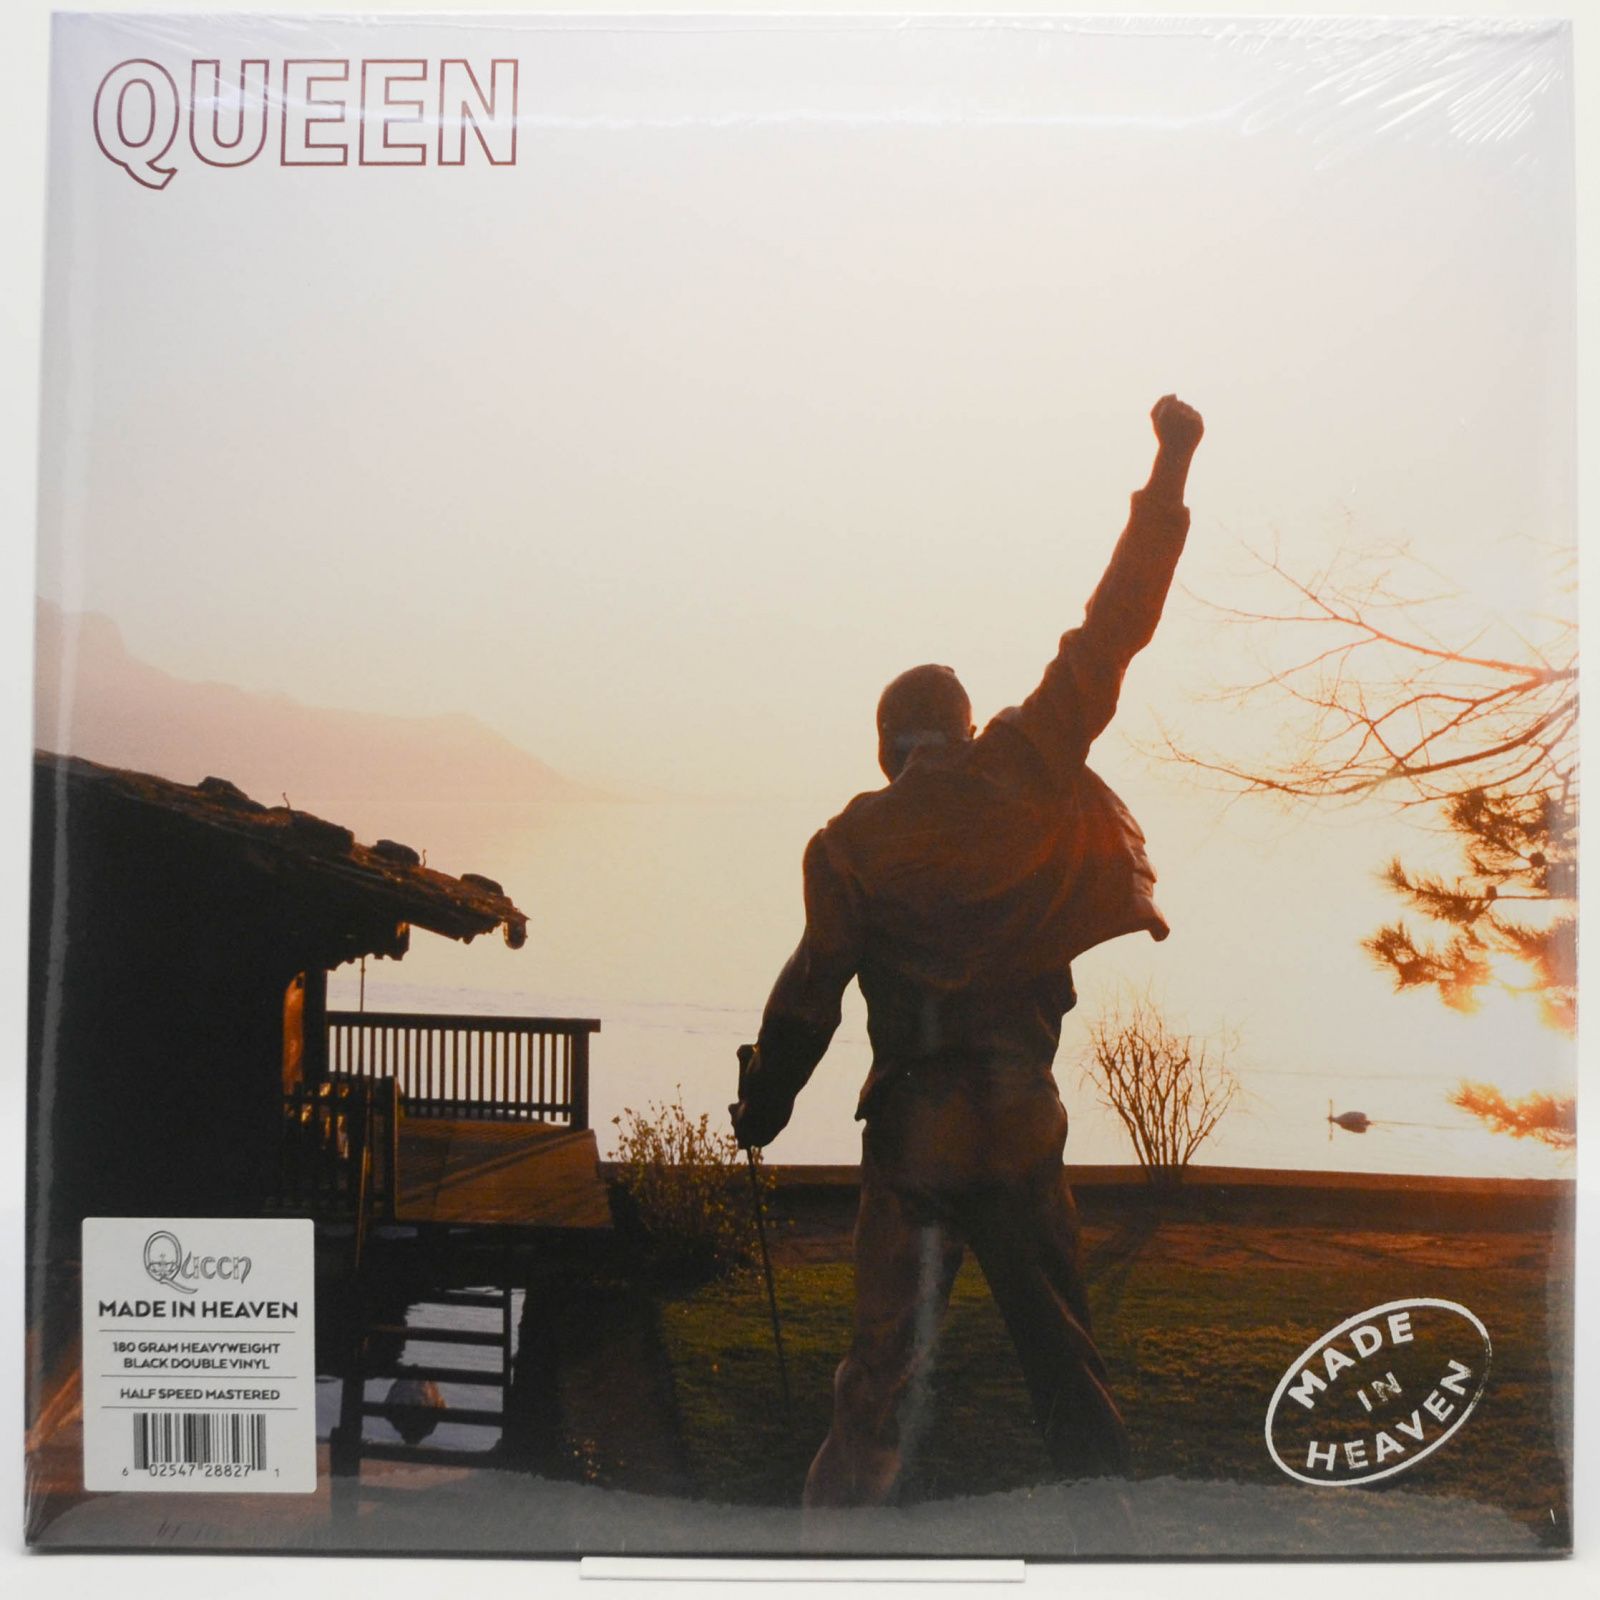 Made in Heaven (2LP), 1995